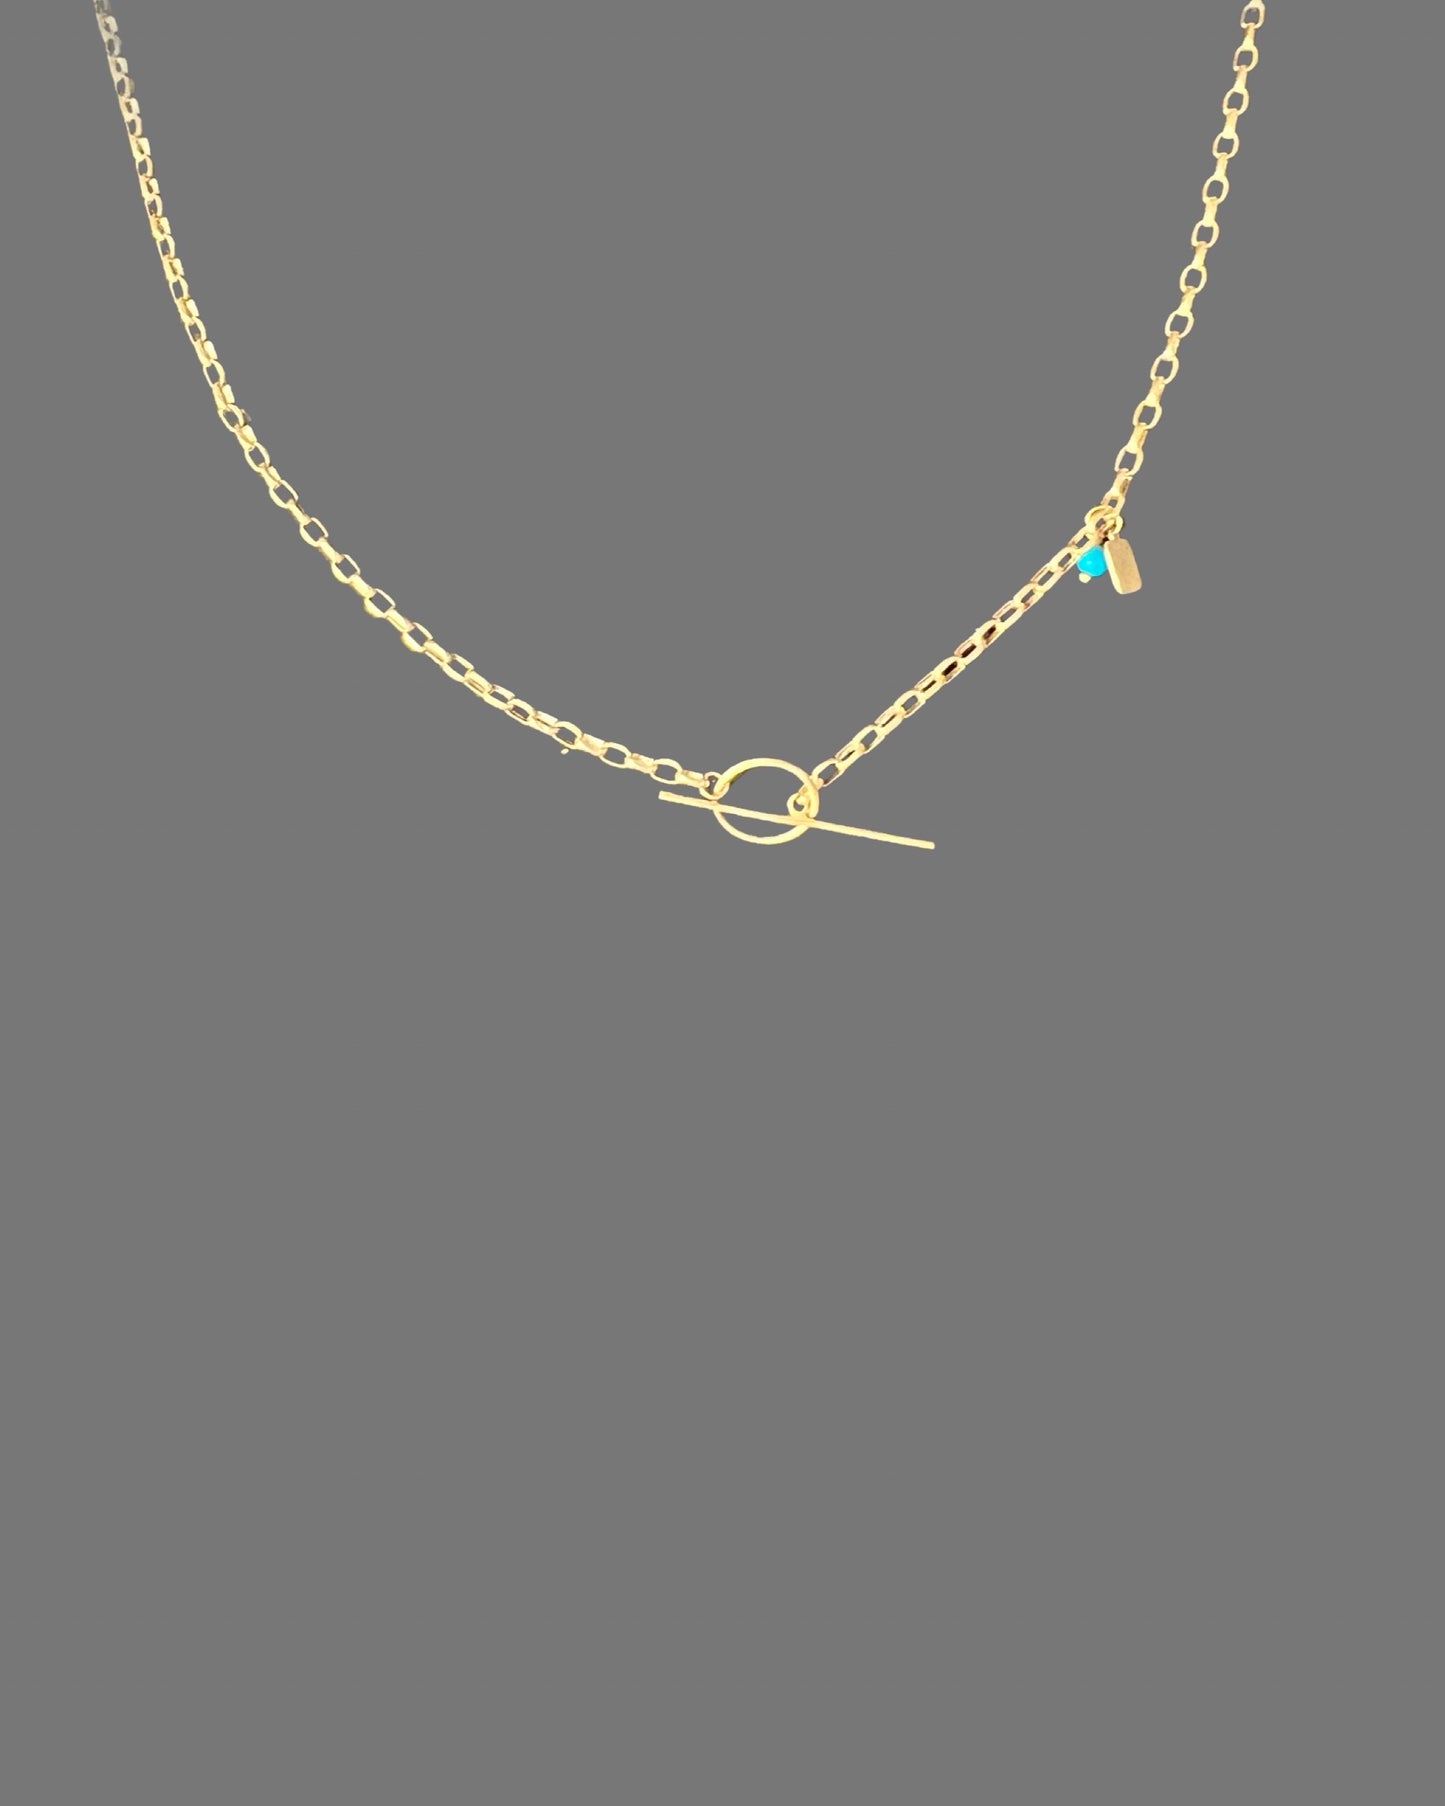 Chain with special Nayla O shape clasp with tag and blue pearl